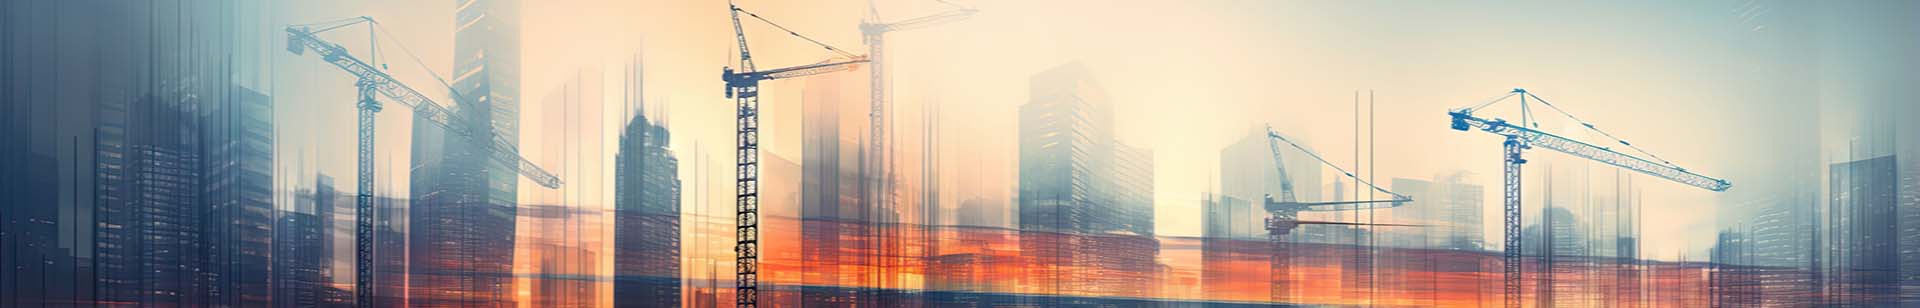 Bustling city with tall construction cranes, symbolizing urban renewal and progress. Blurred cityscape with multiple cranes.